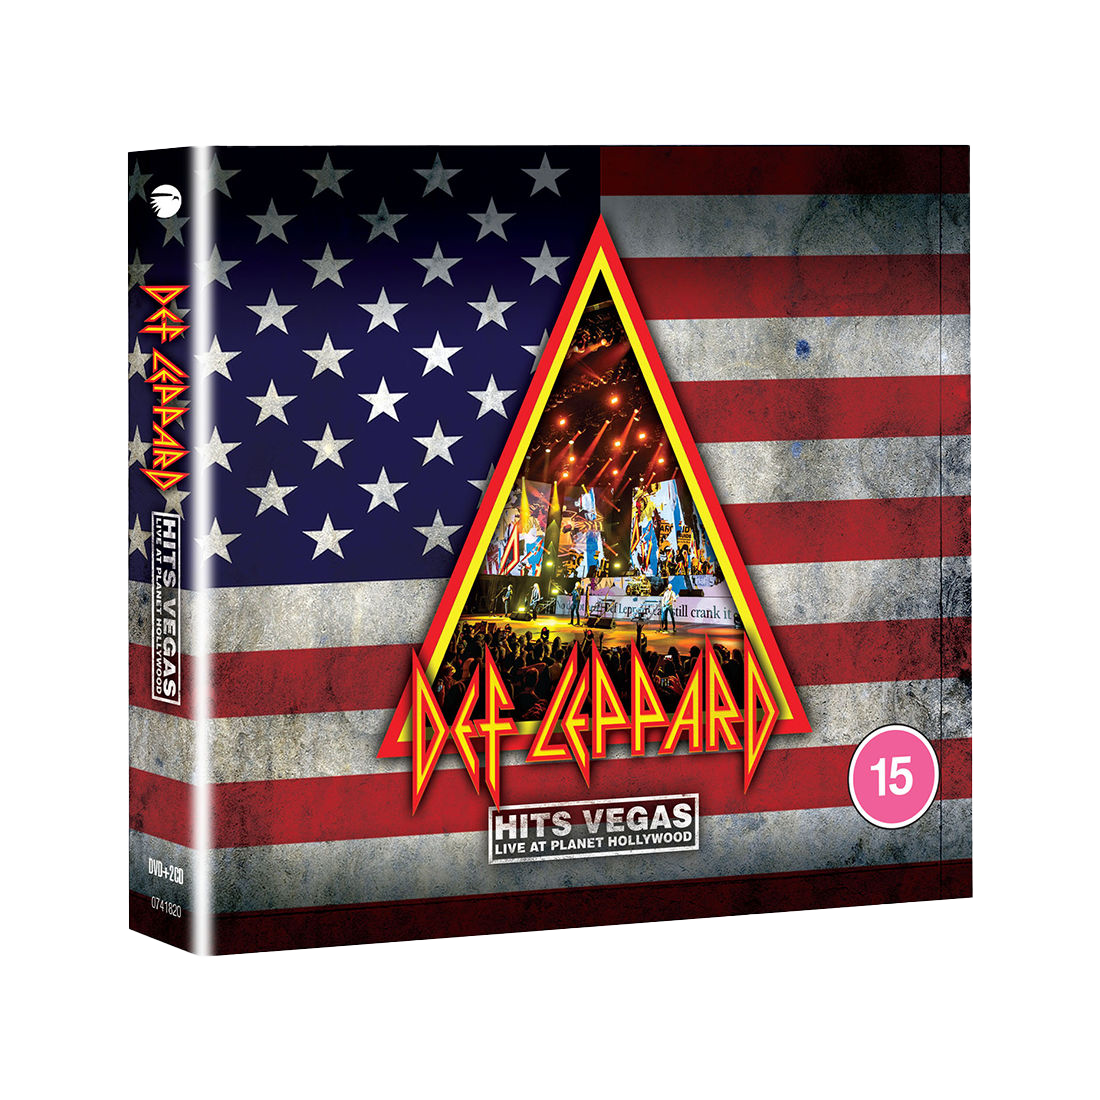 Def Leppard - Hits Vegas - Live At Planet Hollywood: DVD + 2CD